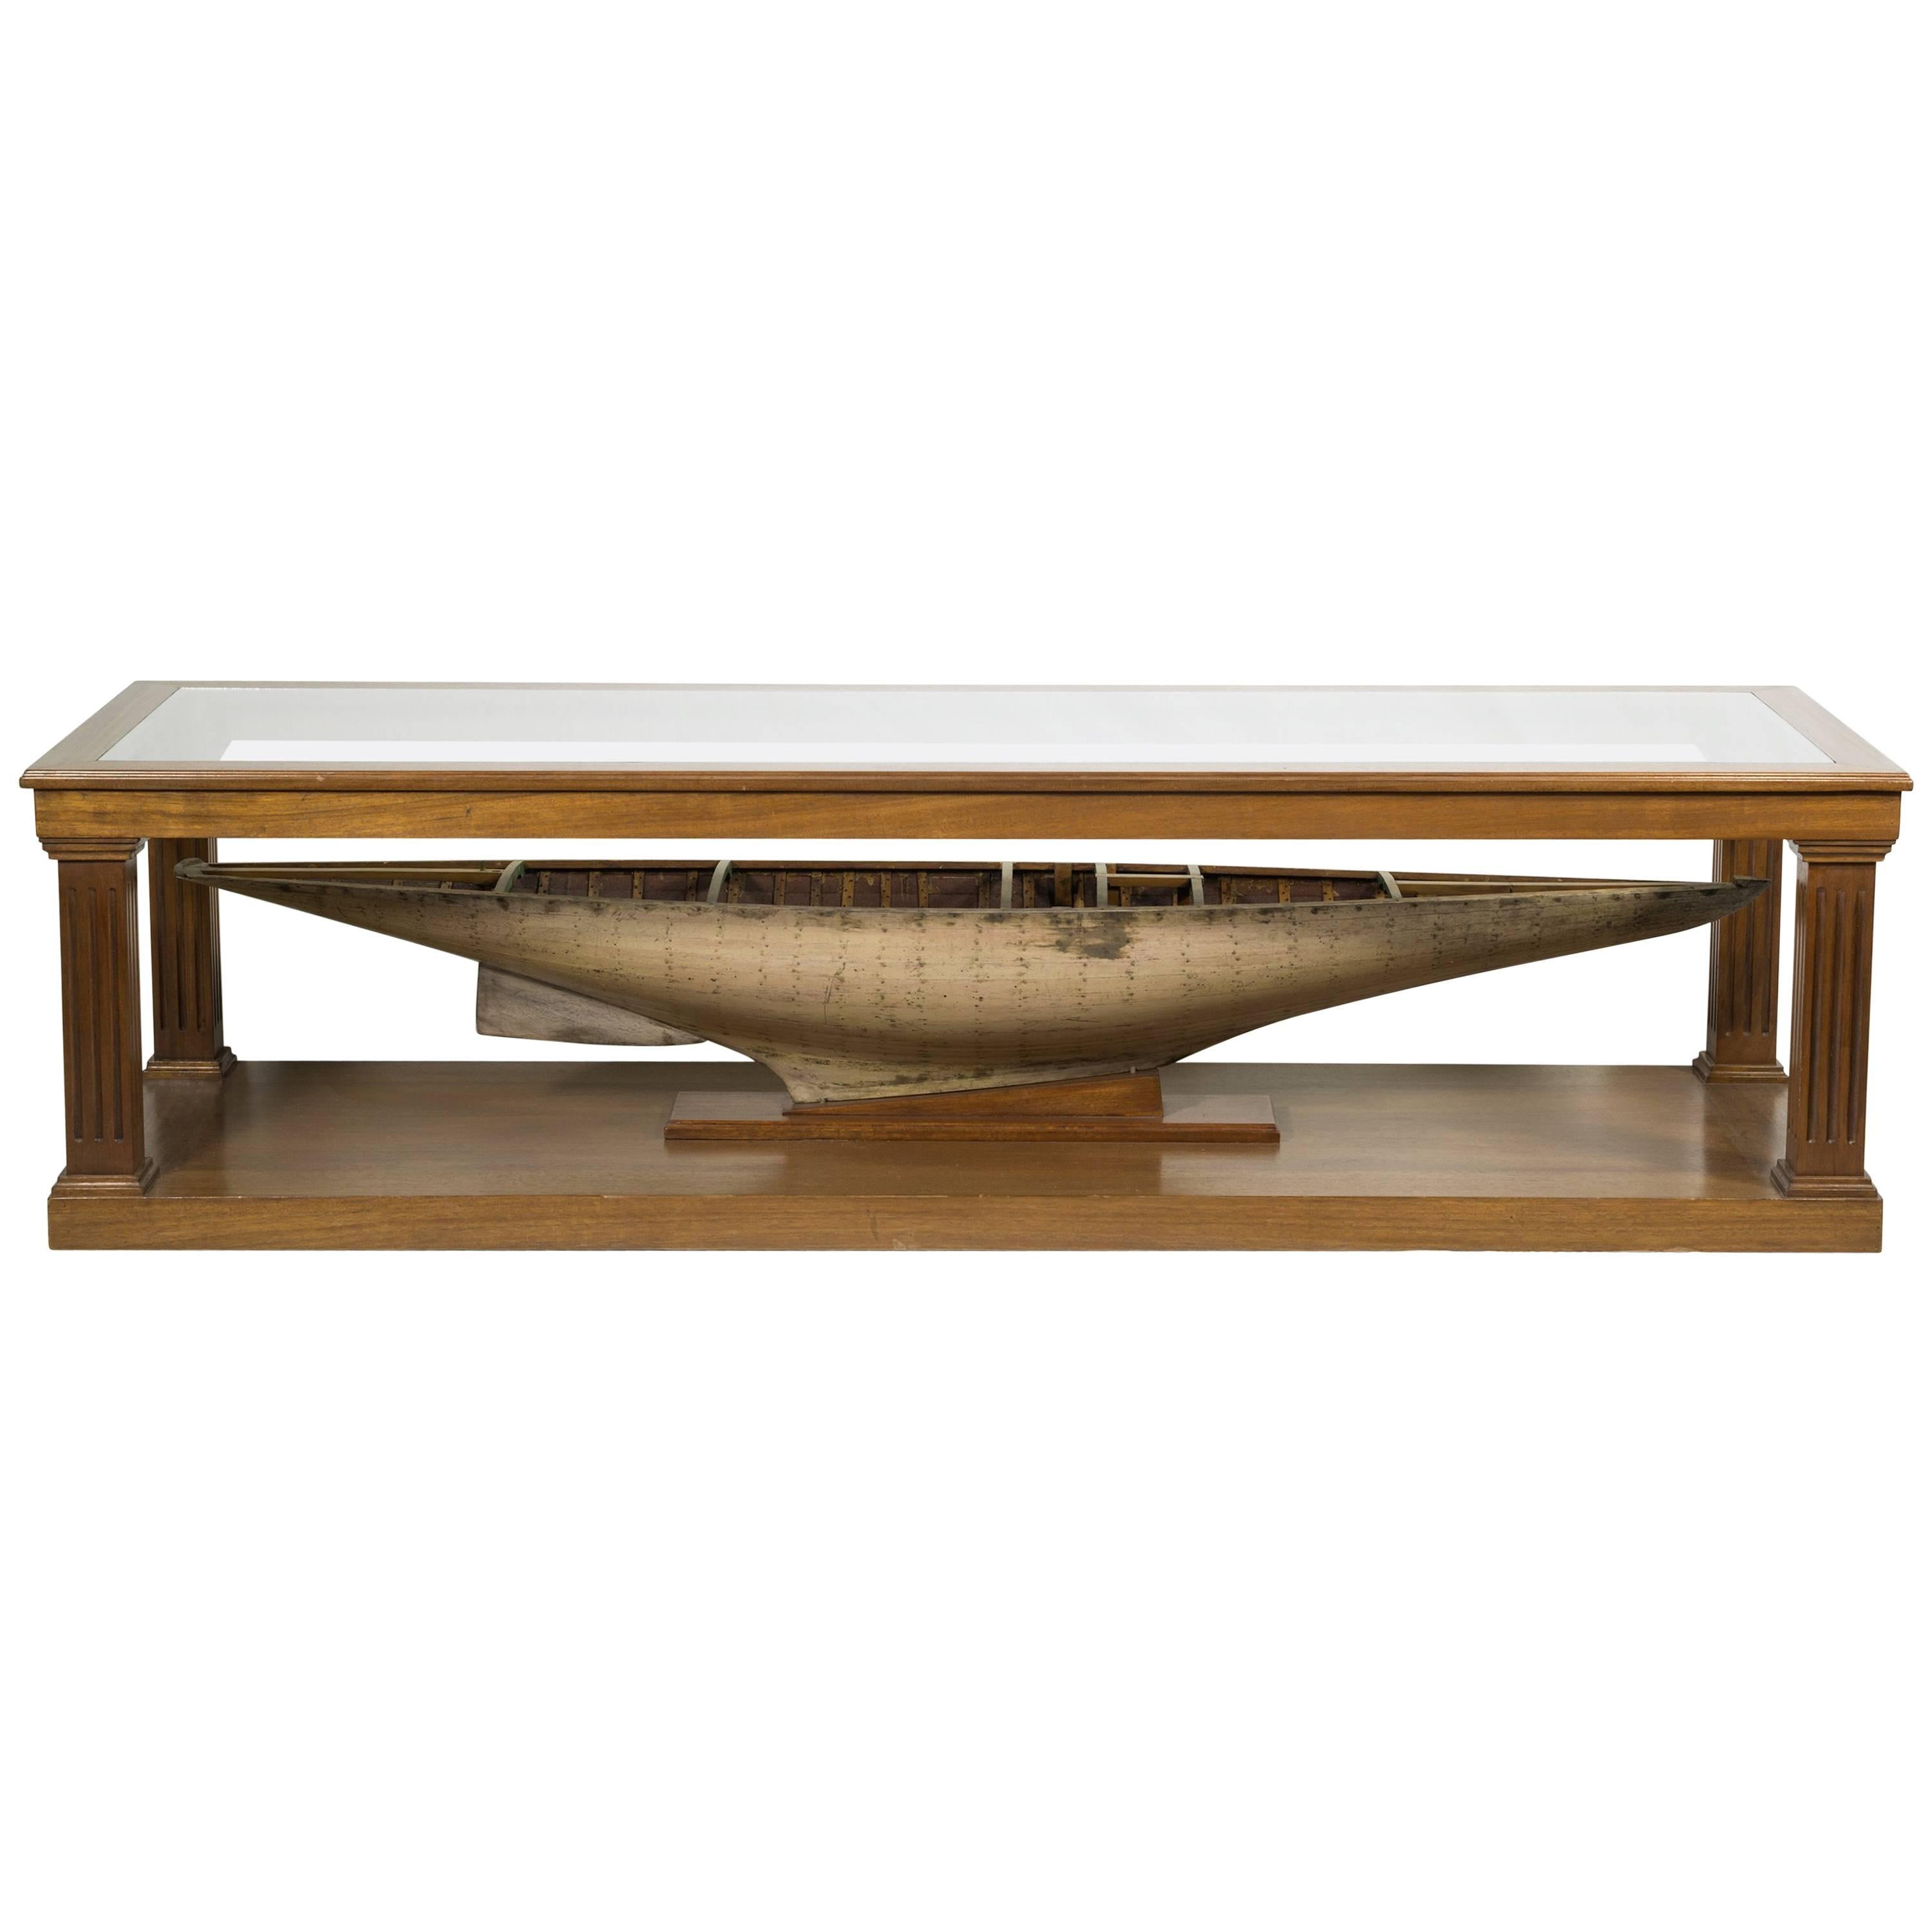 Custom-Made Coffee Table with Antique Pond Yacht Model